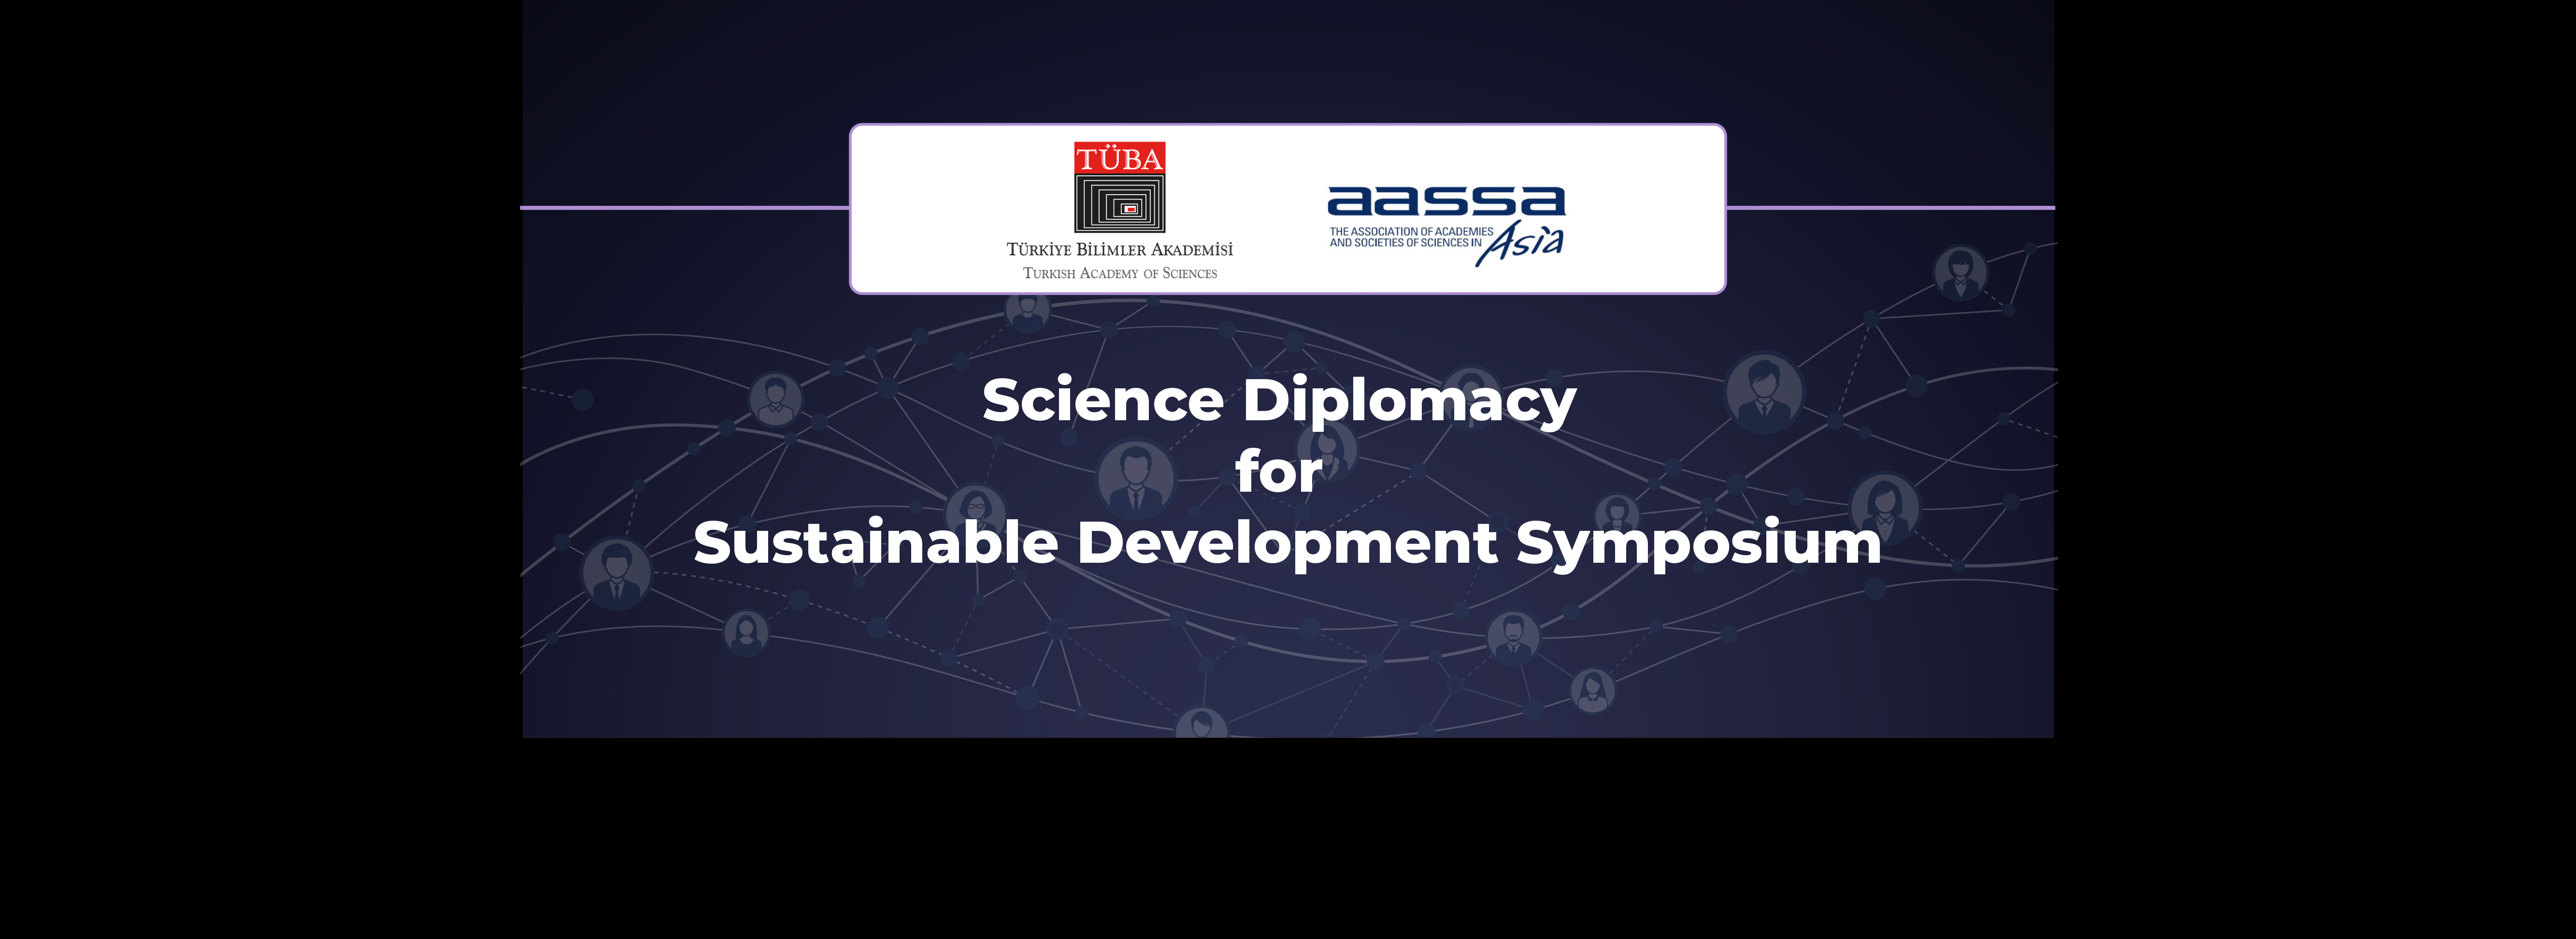 TÜBA Will Hold a Symposium on Science Diplomacy for Sustainable Development